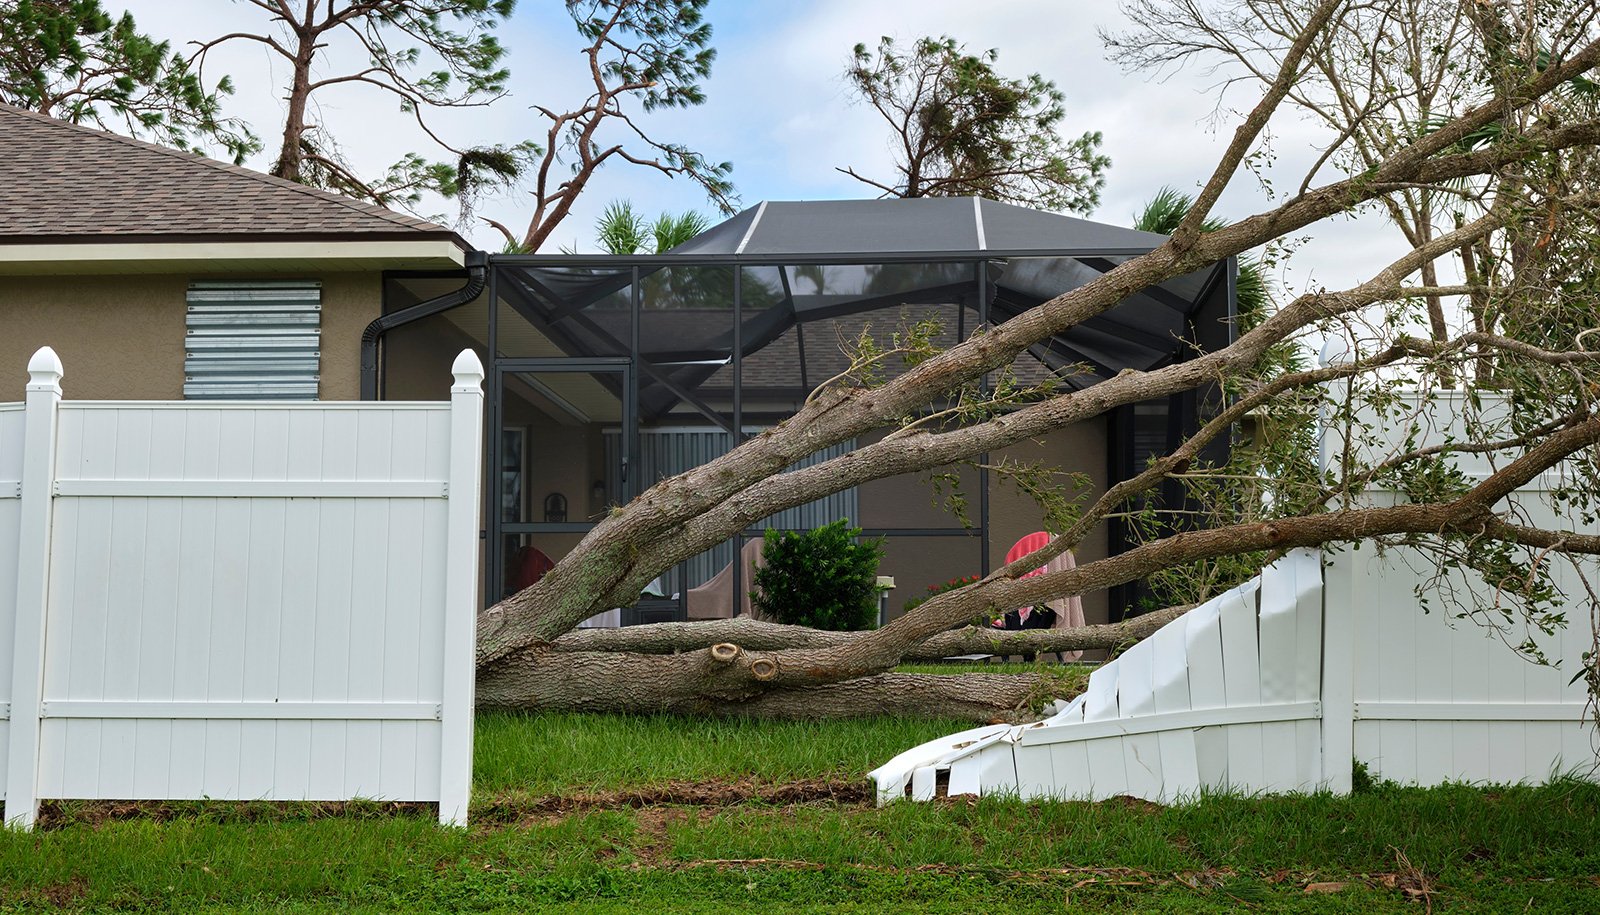 Types of wind insurance policy